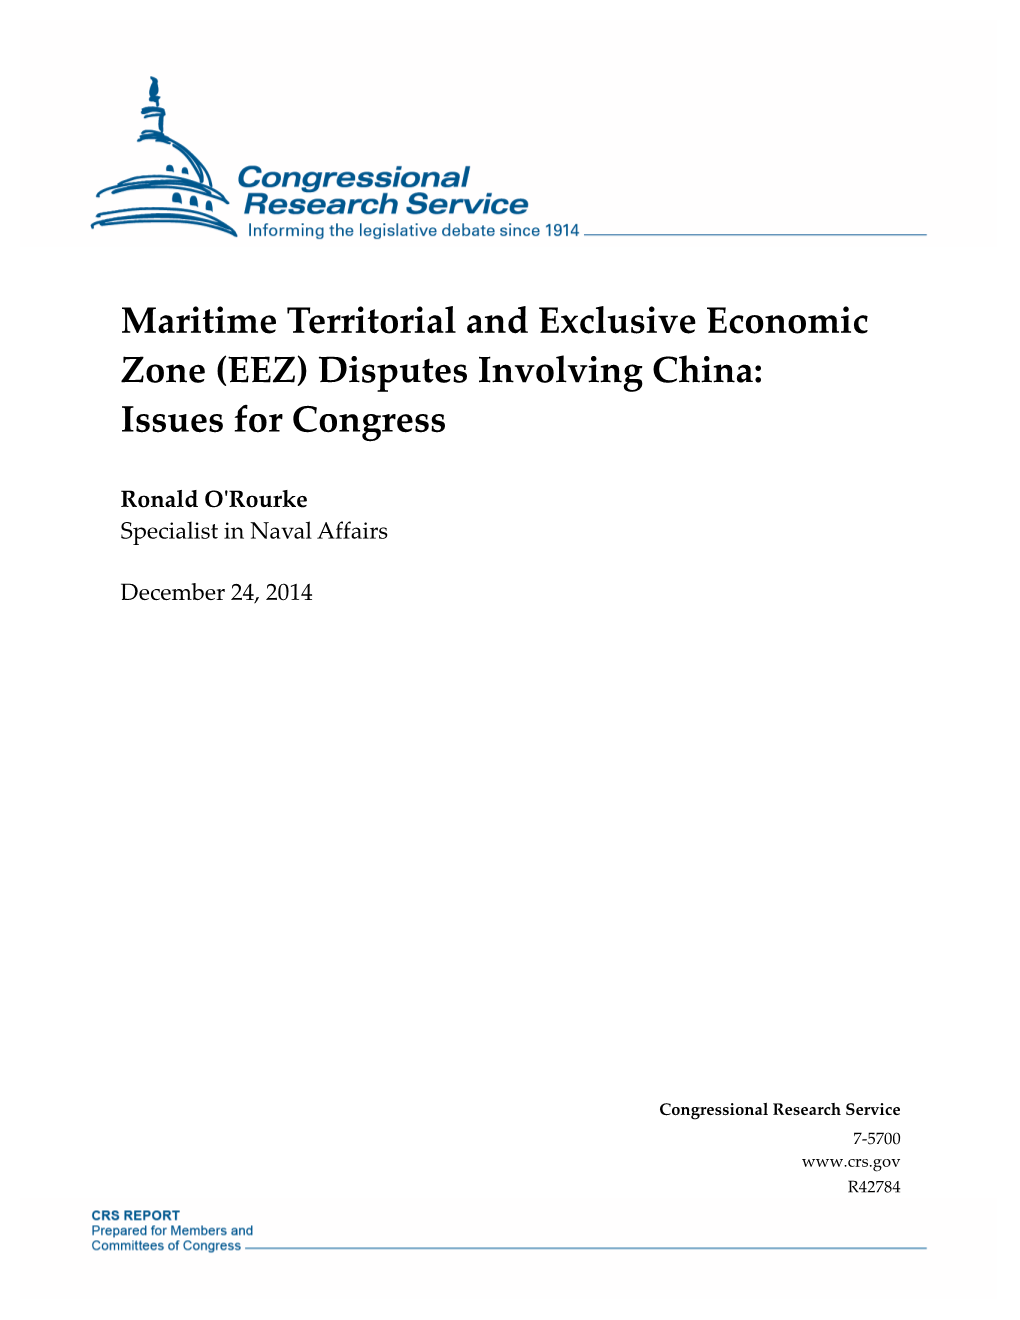 Maritime Territorial and Exclusive Economic Zone (EEZ) Disputes Involving China: Issues for Congress